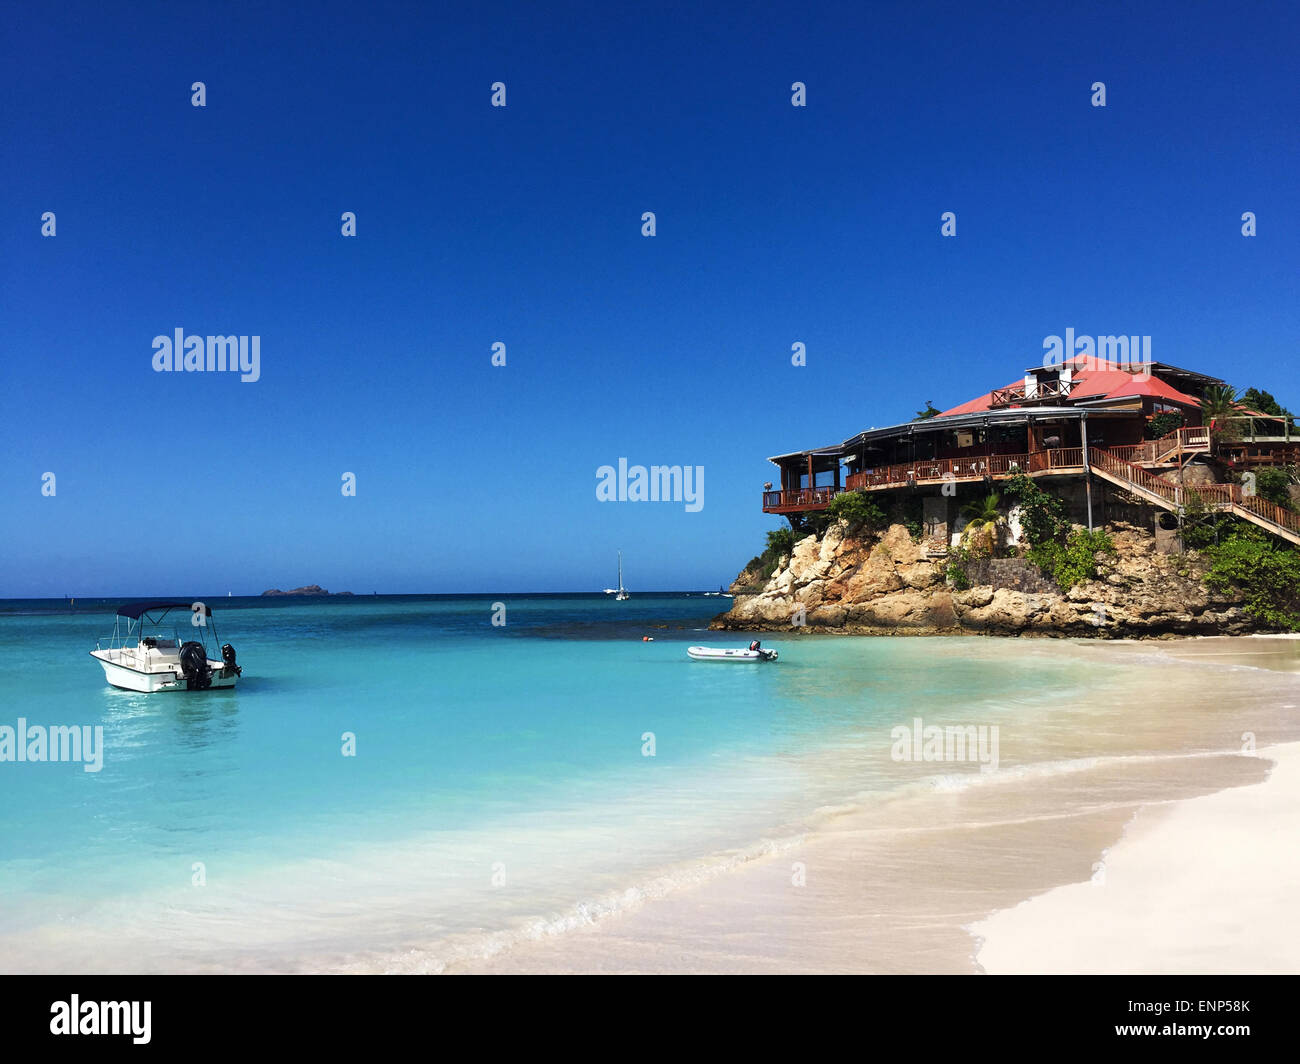 Saint-Barthélemy, French West Indies: panoramic view of the Eden Rock, the famous luxury hotel on the Caribbean Sea at the Saint Jean beach and bay Stock Photo